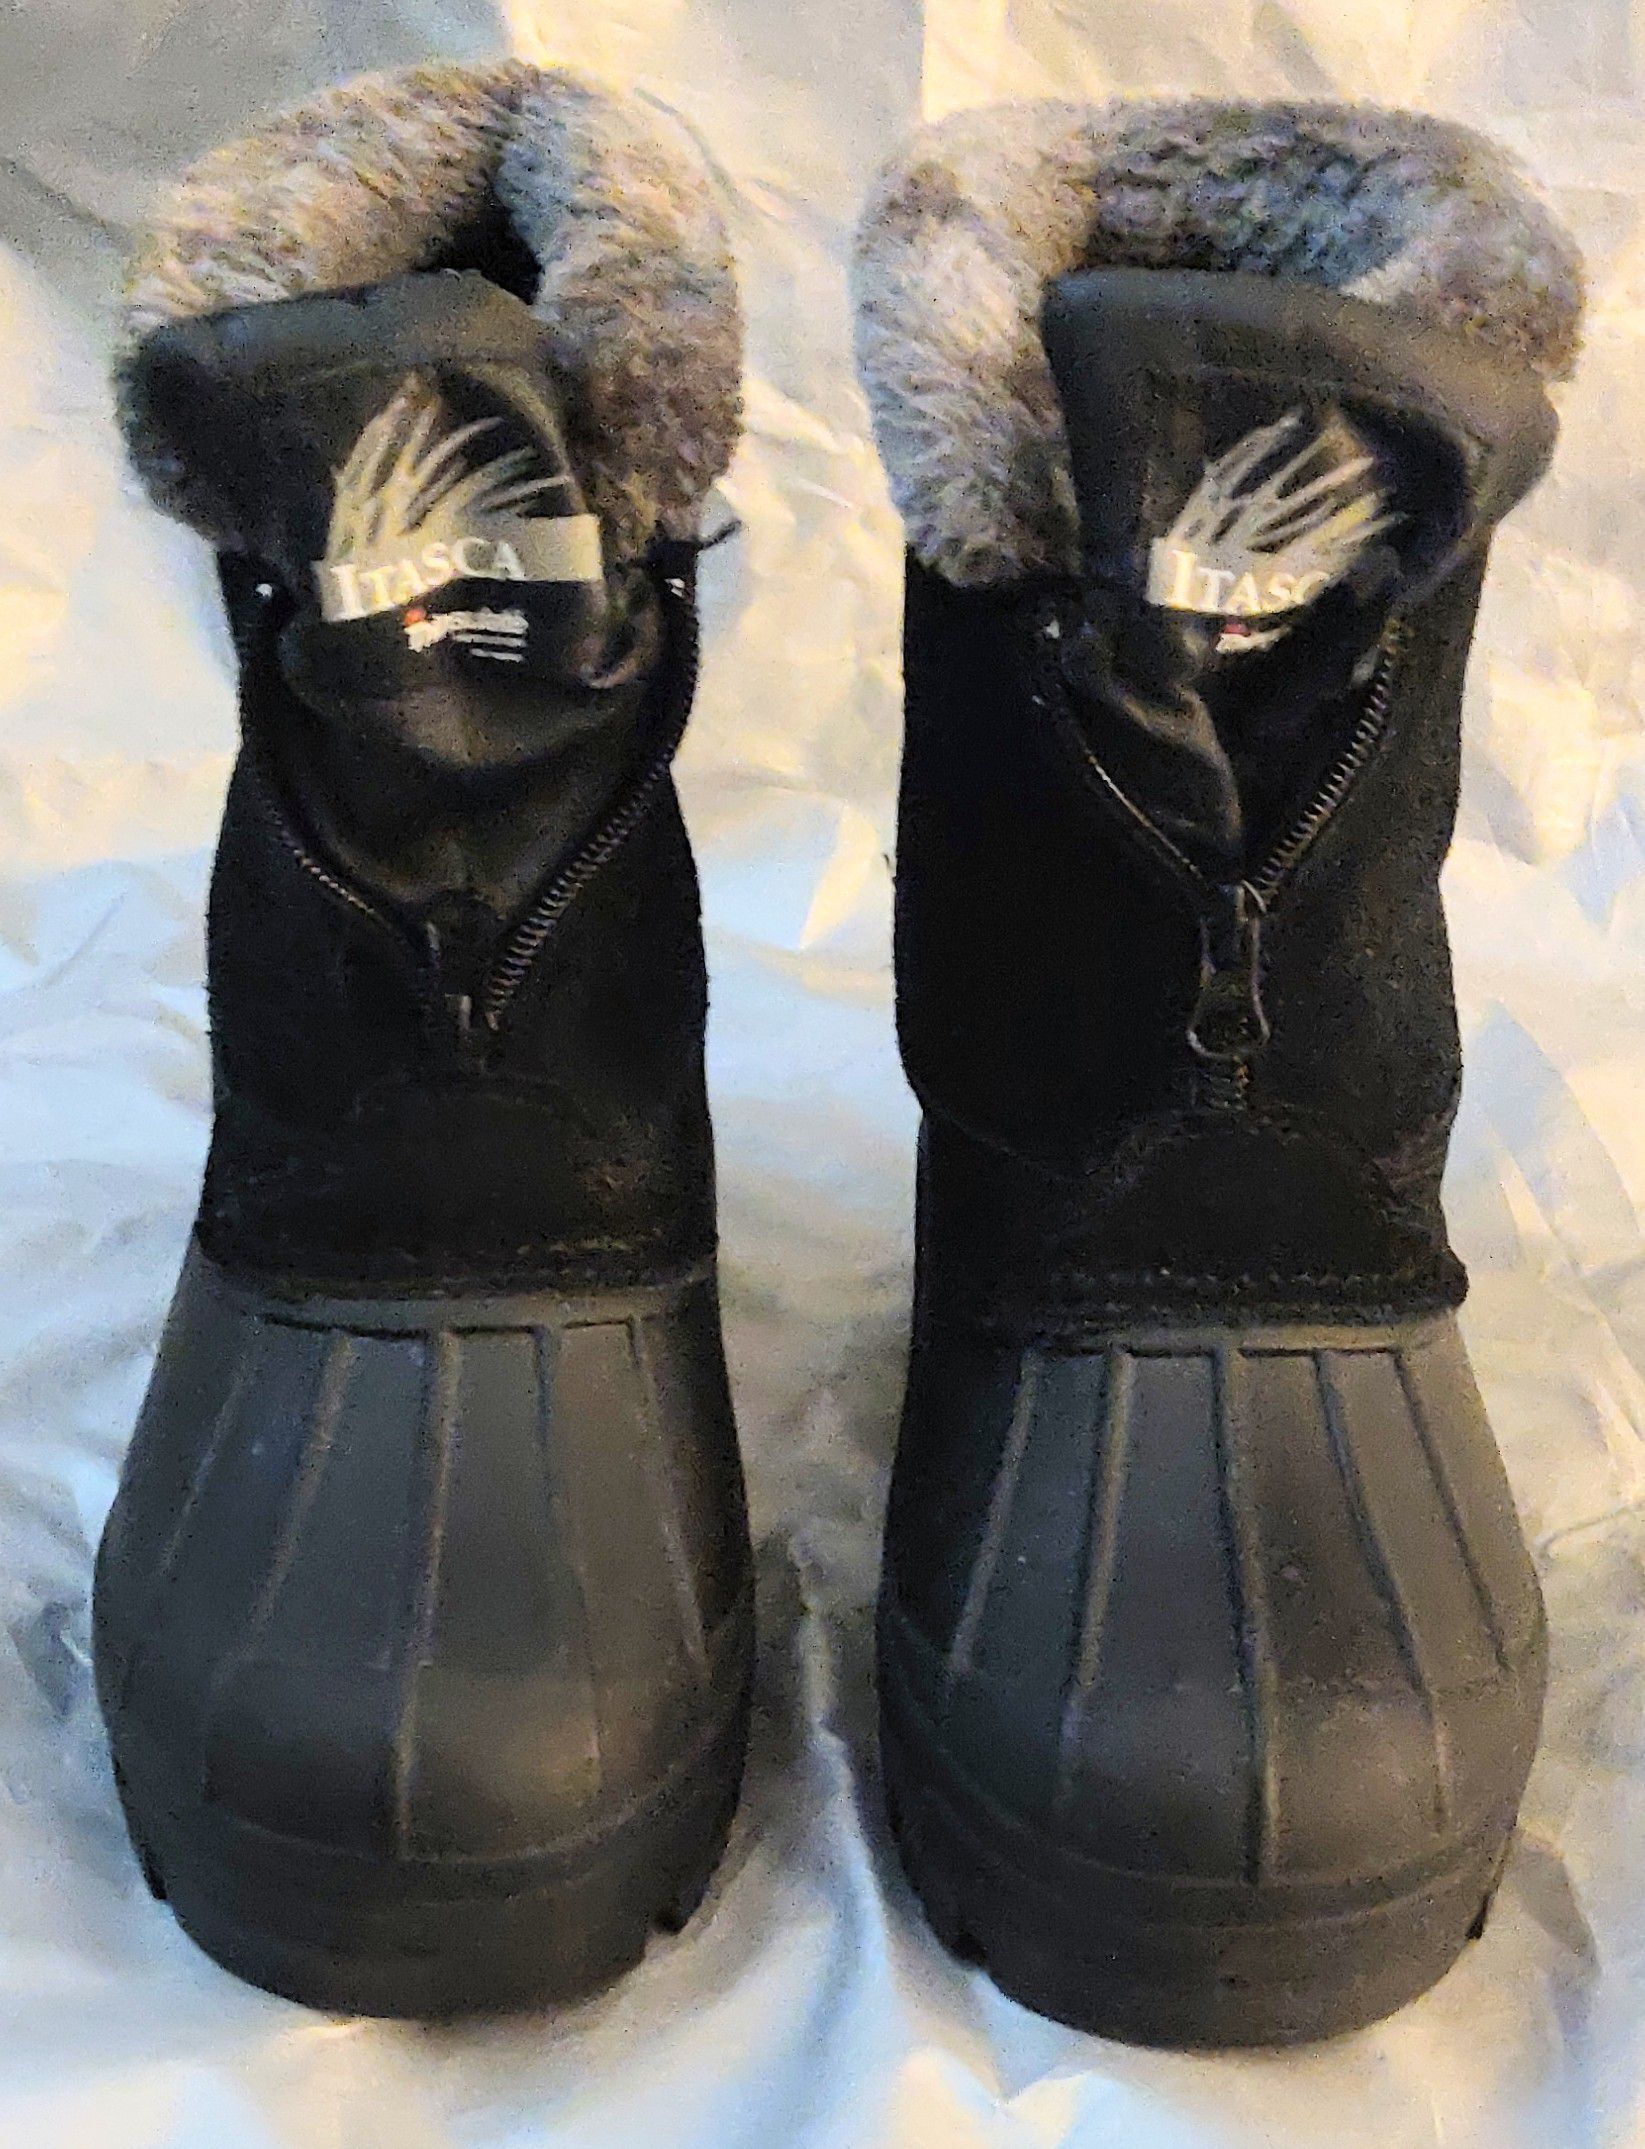 Snow boots-Itasca Women's Tahoe Front Zip Insulated Boots size 8m